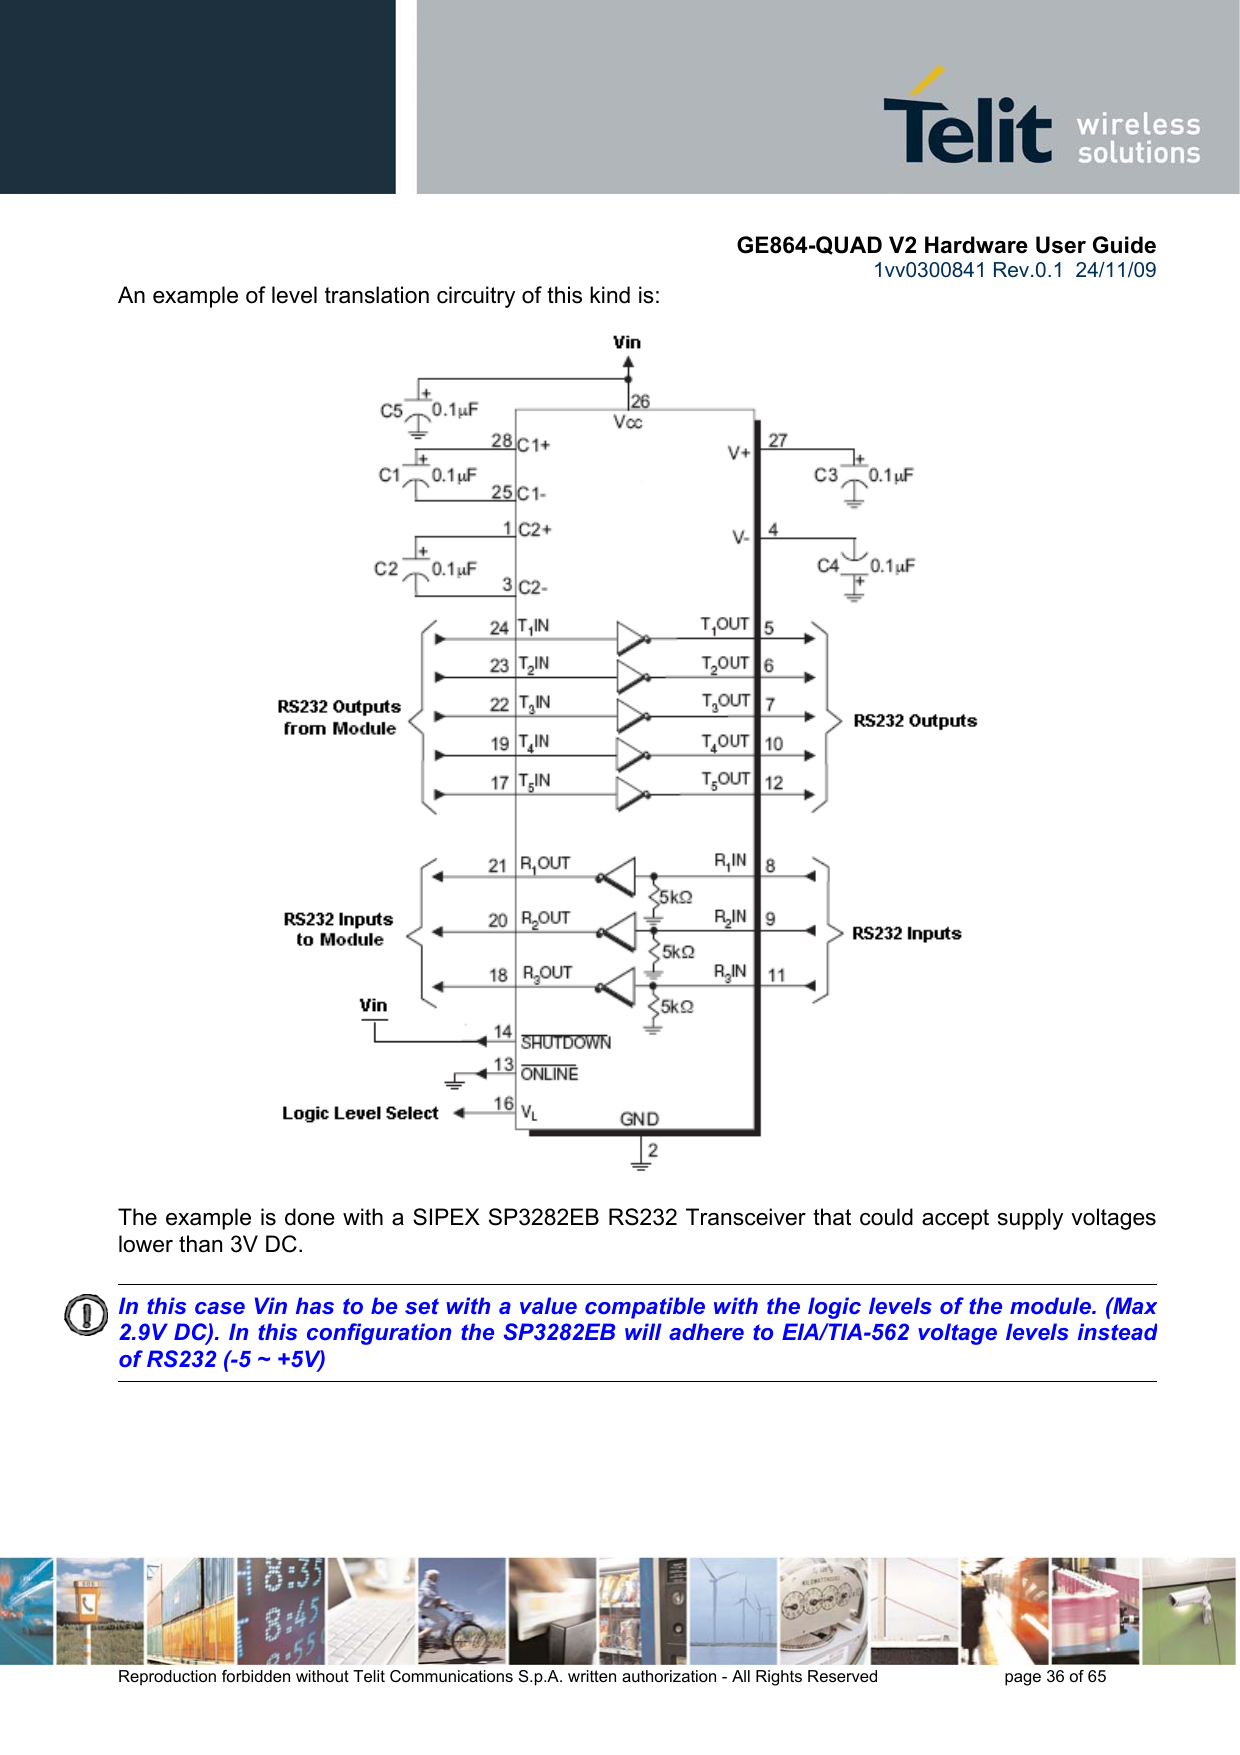       GE864-QUAD V2 Hardware User Guide 1vv0300841 Rev.0.1  24/11/09      Reproduction forbidden without Telit Communications S.p.A. written authorization - All Rights Reserved    page 36 of 65  An example of level translation circuitry of this kind is:                                   The example is done with a SIPEX SP3282EB RS232 Transceiver that could accept supply voltages lower than 3V DC.        In this case Vin has to be set with a value compatible with the logic levels of the module. (Max 2.9V DC). In this configuration the SP3282EB will adhere to EIA/TIA-562 voltage levels instead of RS232 (-5 ~ +5V) 